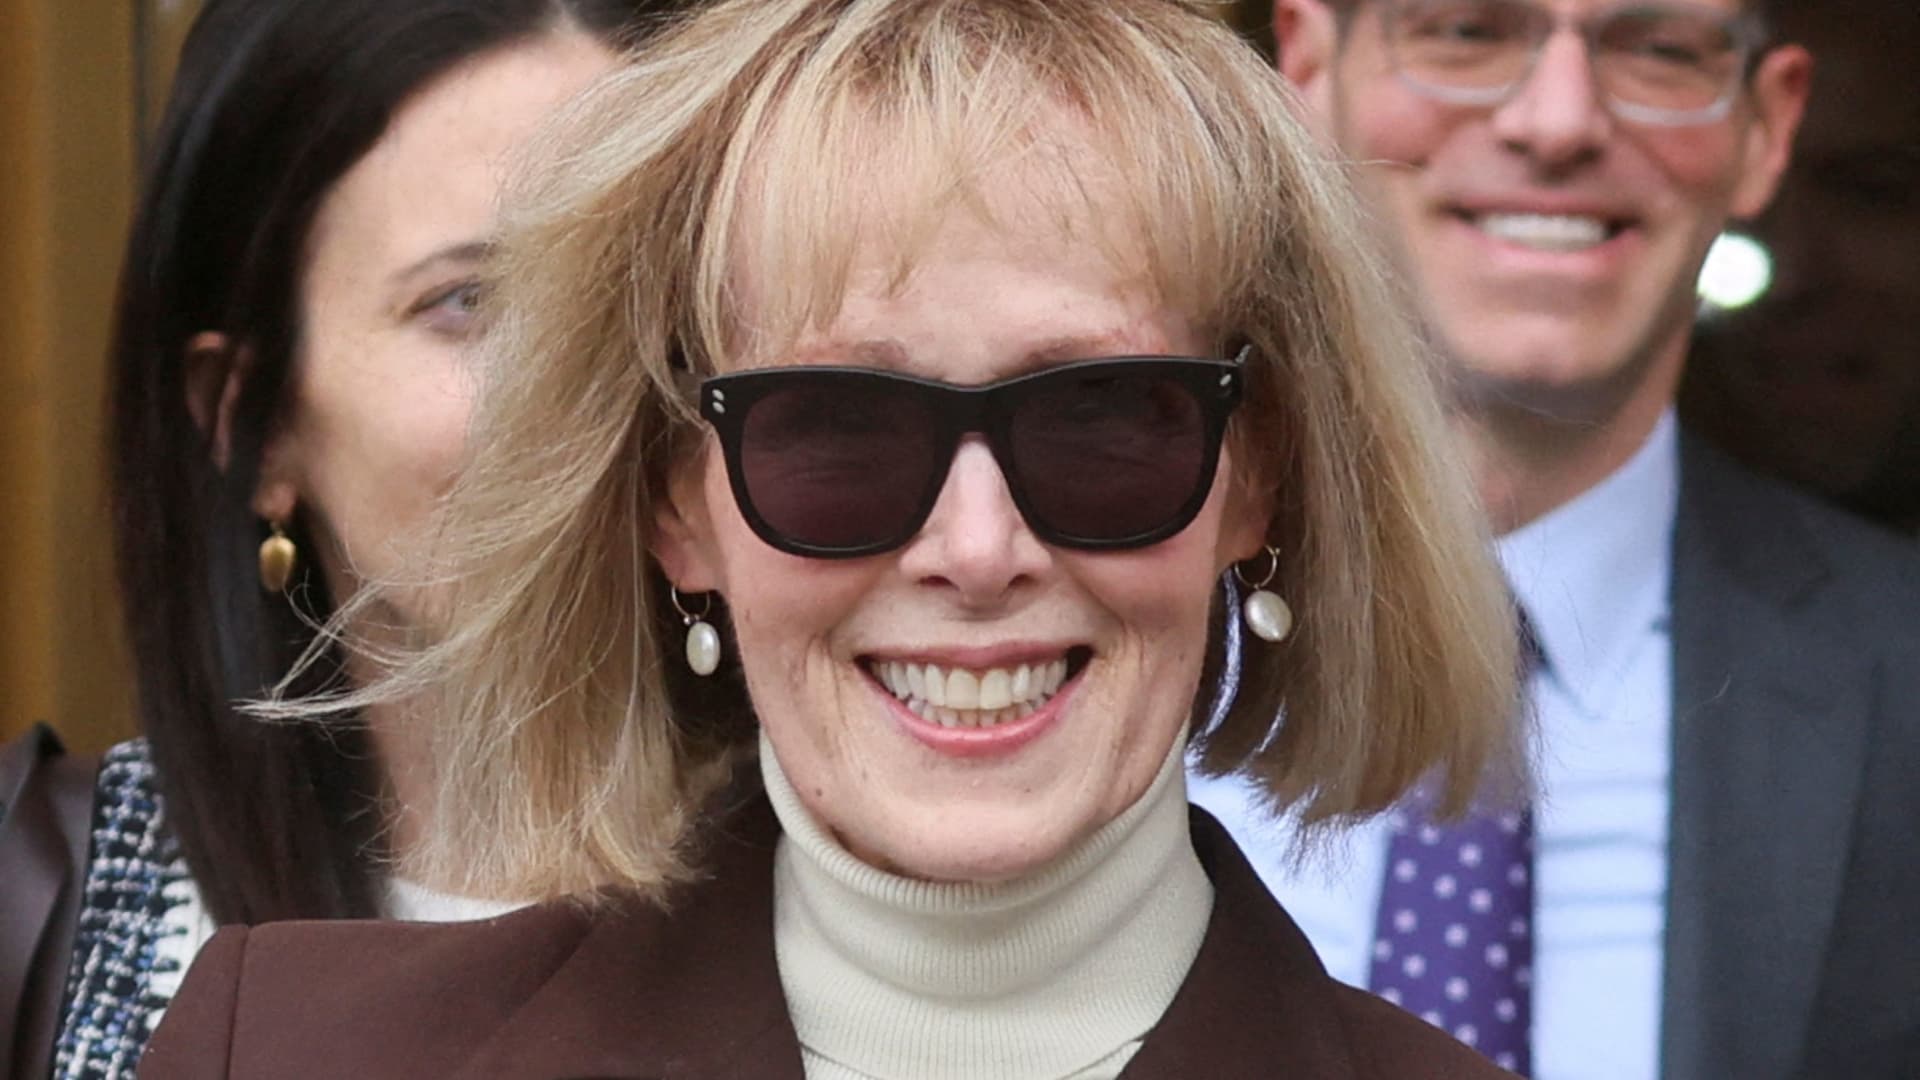 Trump’s Appeal on E. Jean Carroll’s Defamation Lawsuit Denied, Partial Victory Achieved